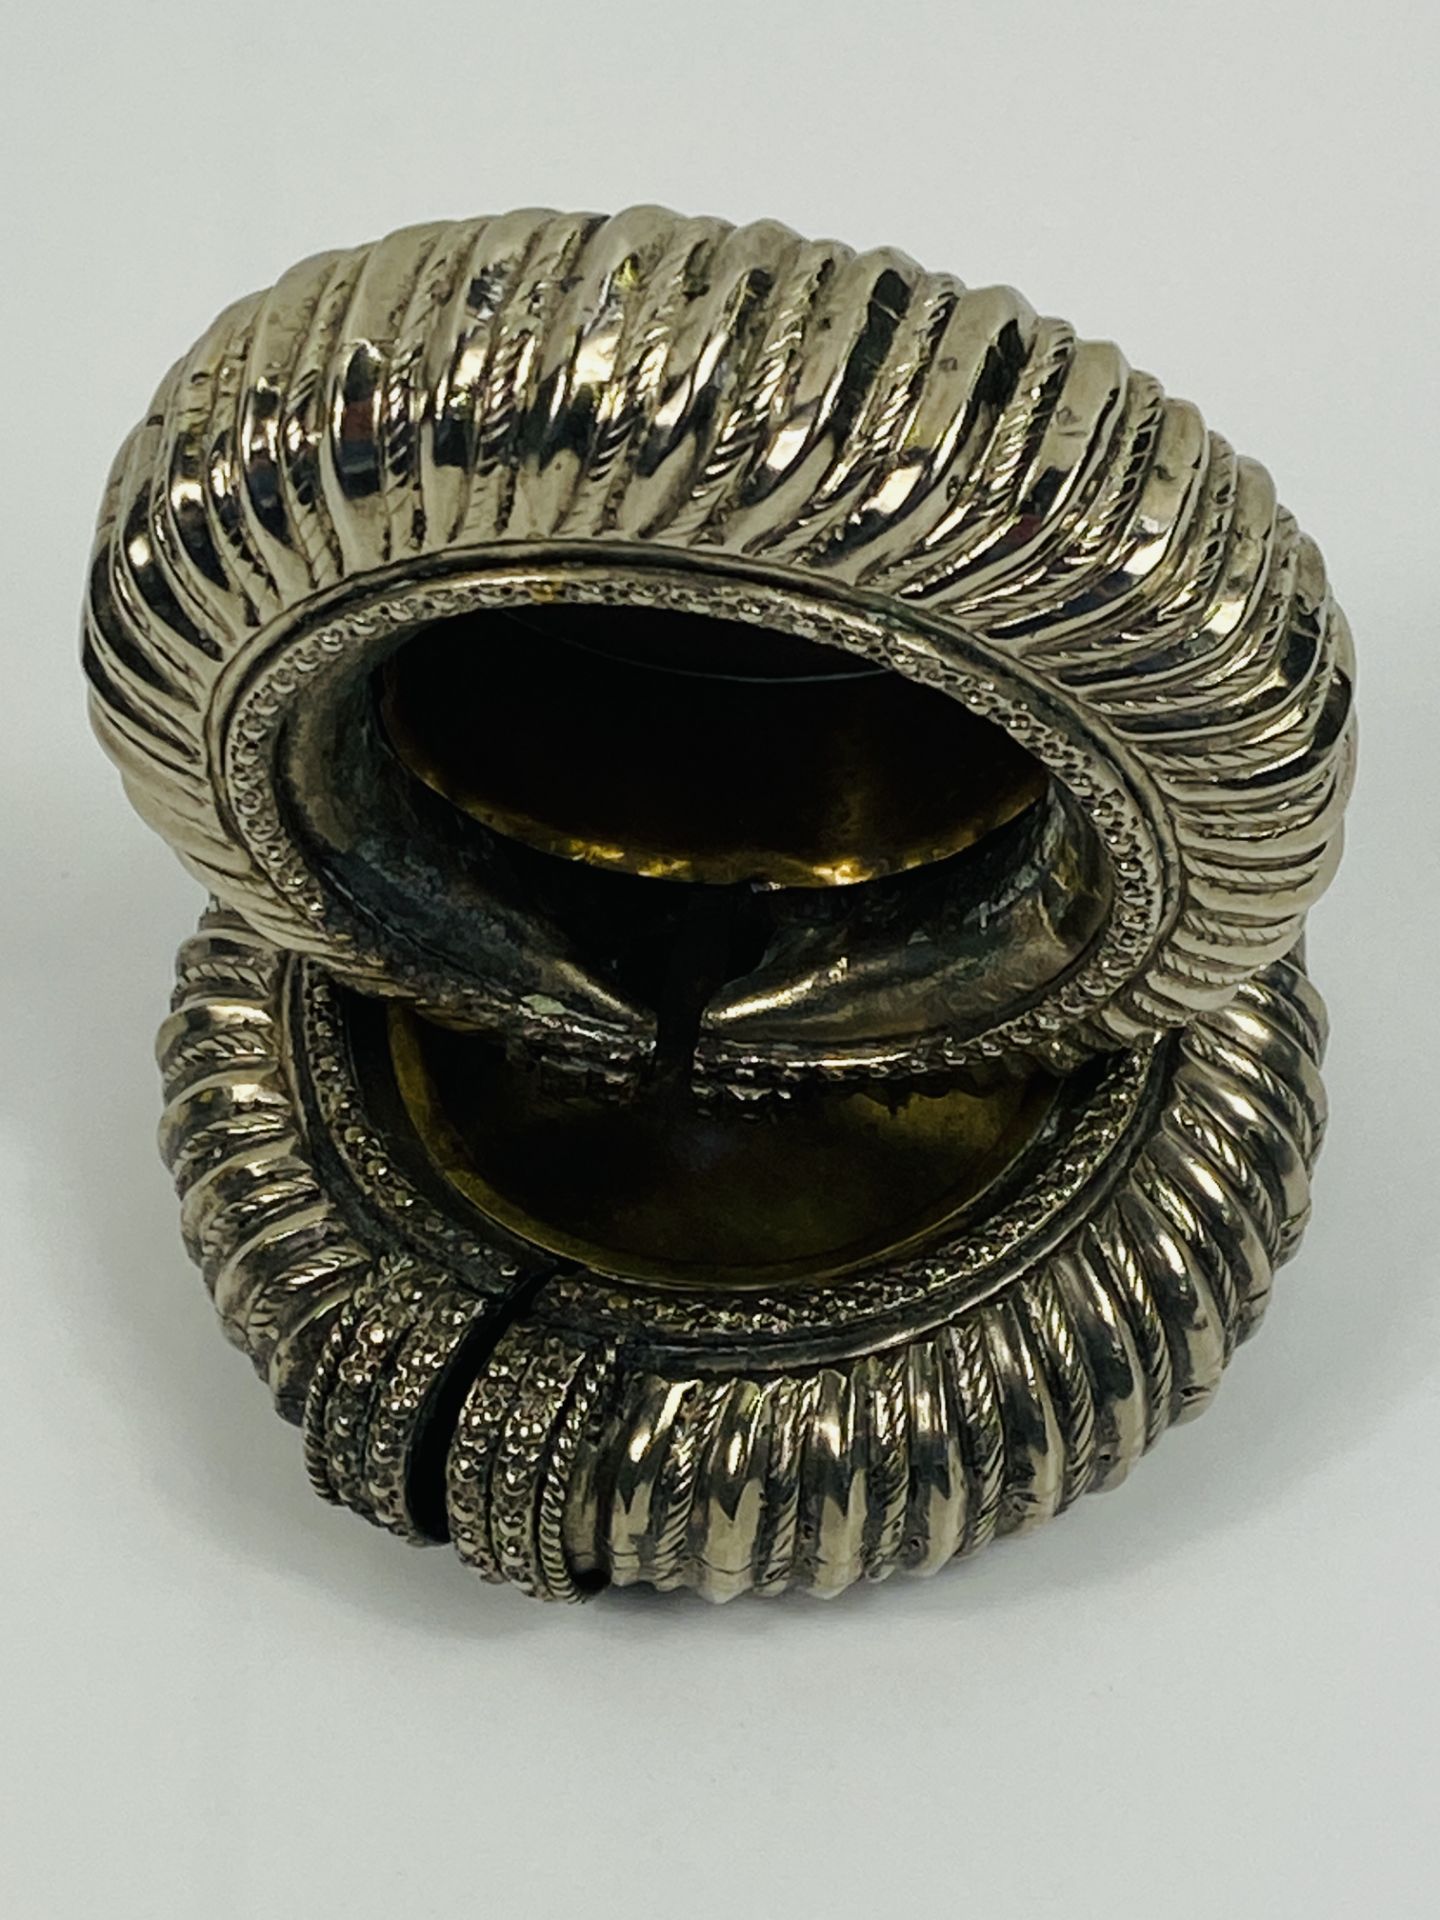 Pair of white metal ankle bangles with brass inserts - Image 3 of 7